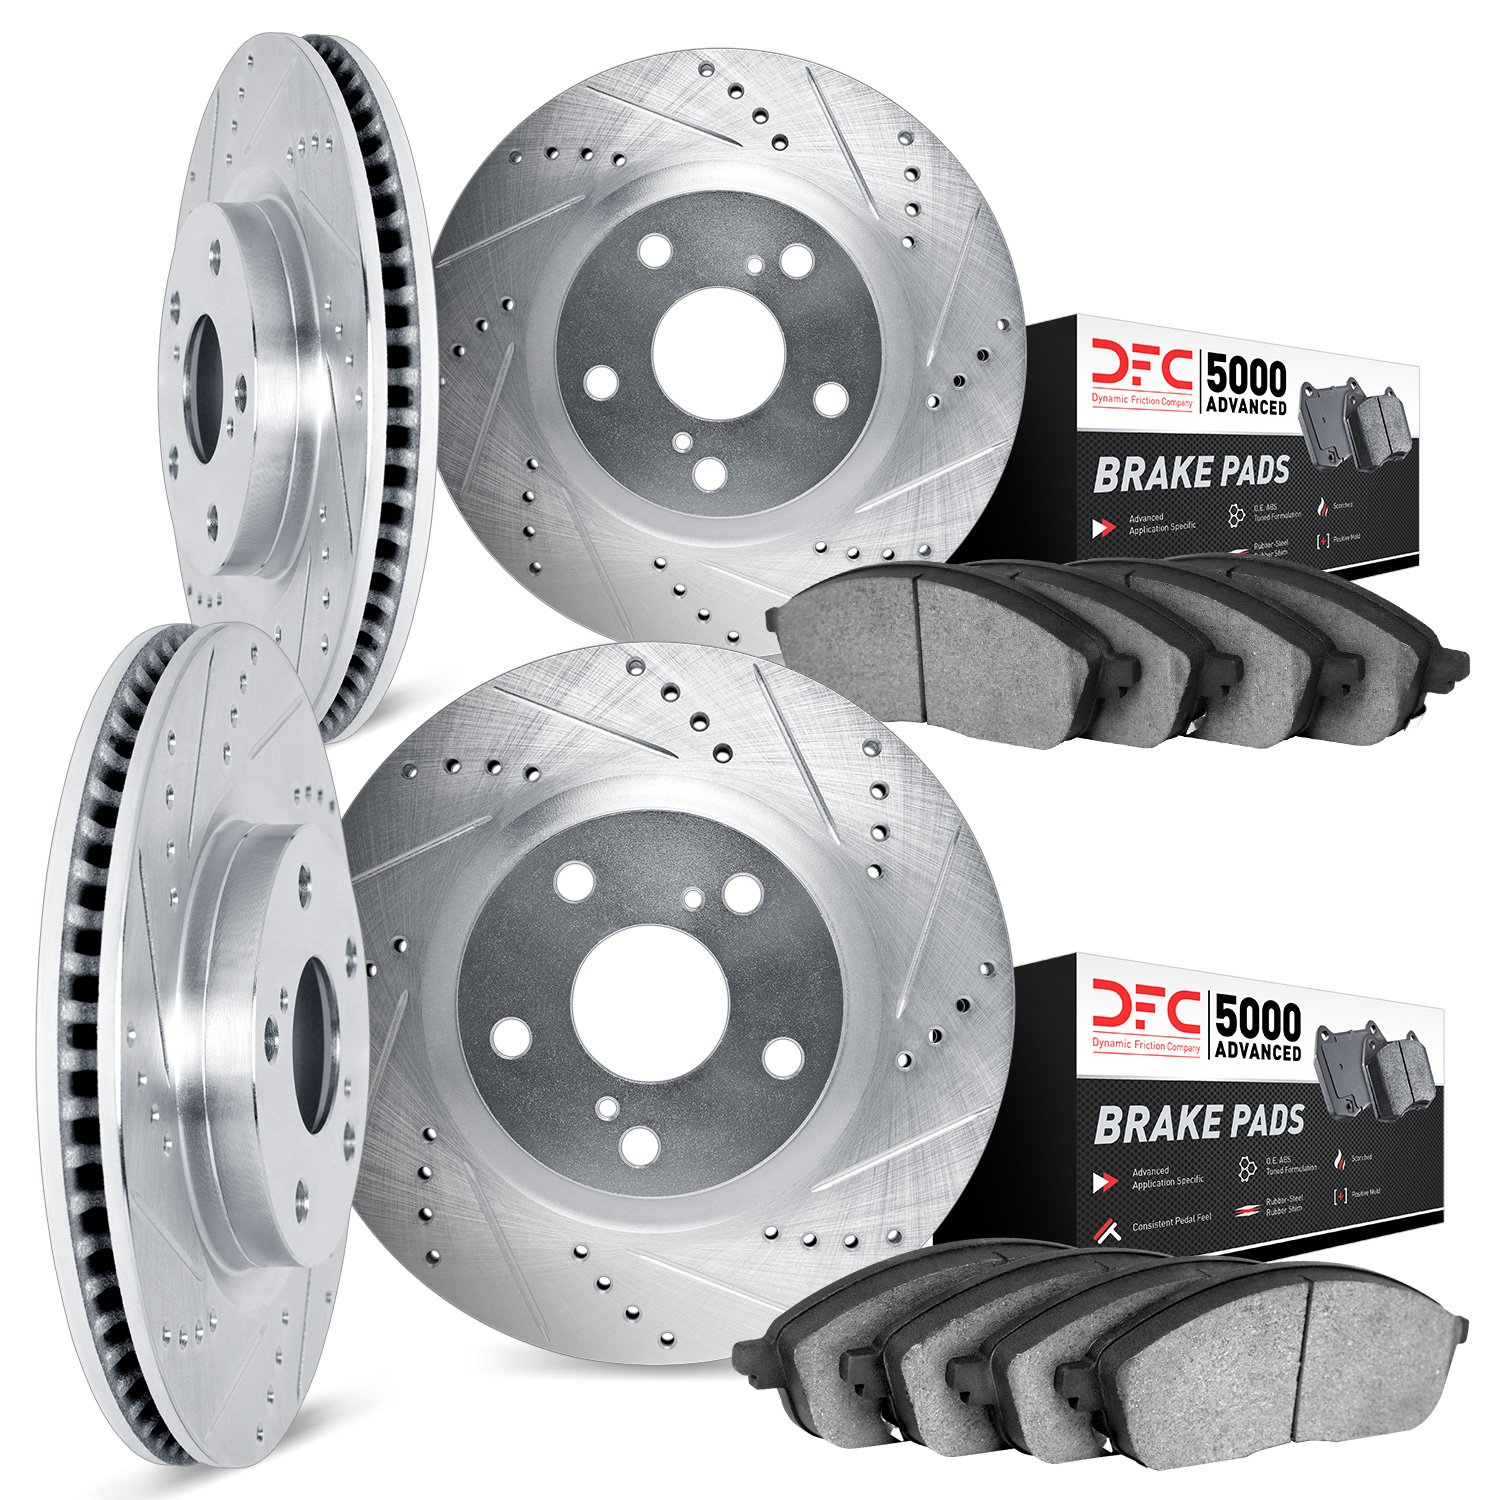 7504-31010 Drilled/Slotted Brake Rotors w/5000 Advanced Brake Pads Kit [Silver], 2000-2003 BMW, Position: Front and Rear